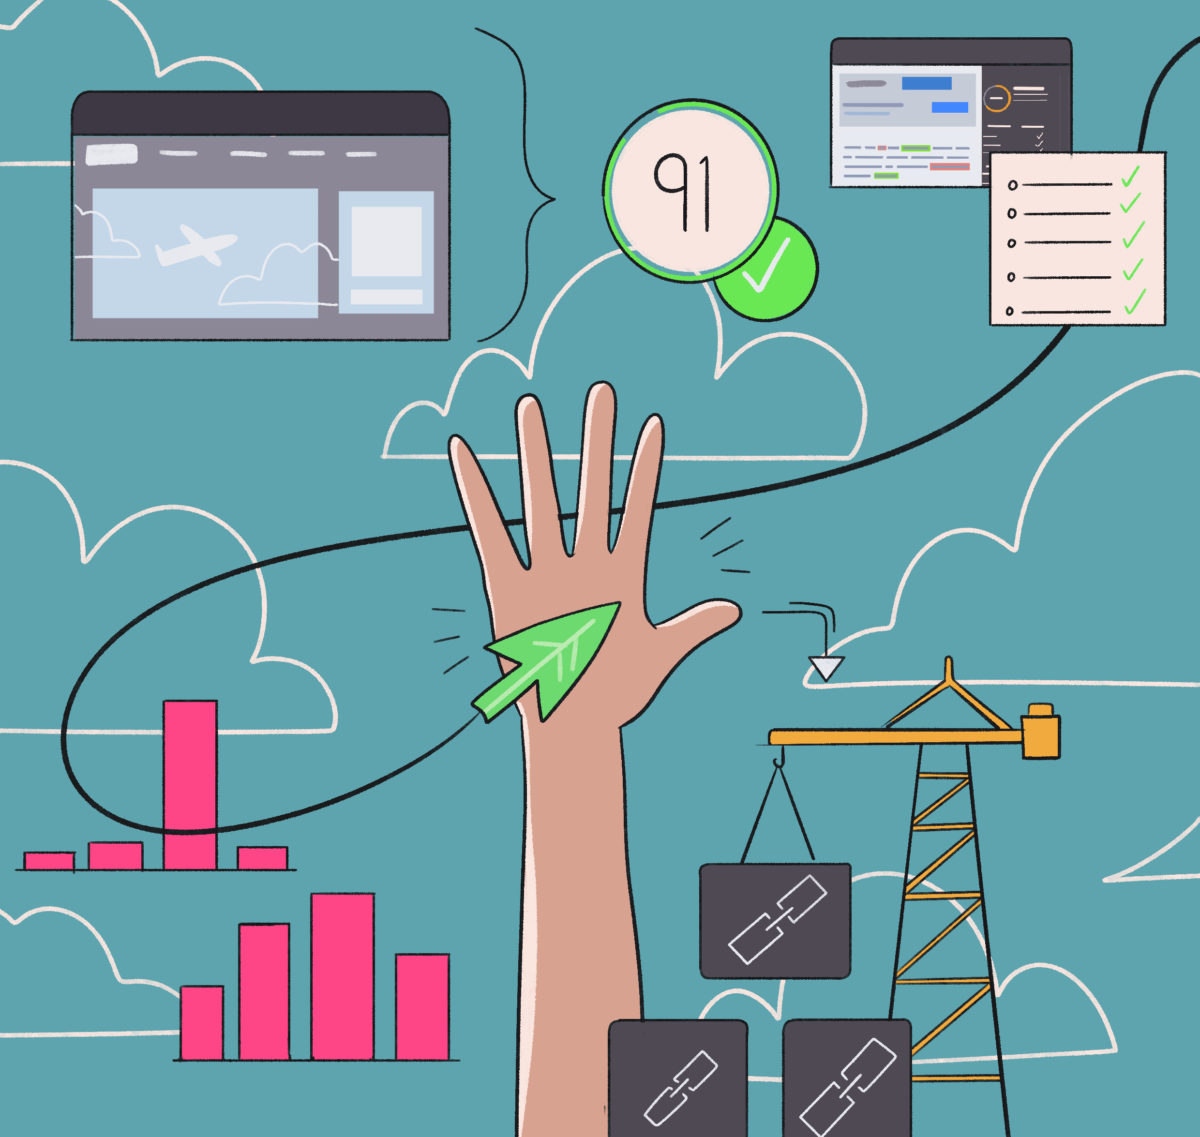 An illustration of a hand interacting with various business and technology elements, symbolizing connectivity and multitasking in a digital environment.